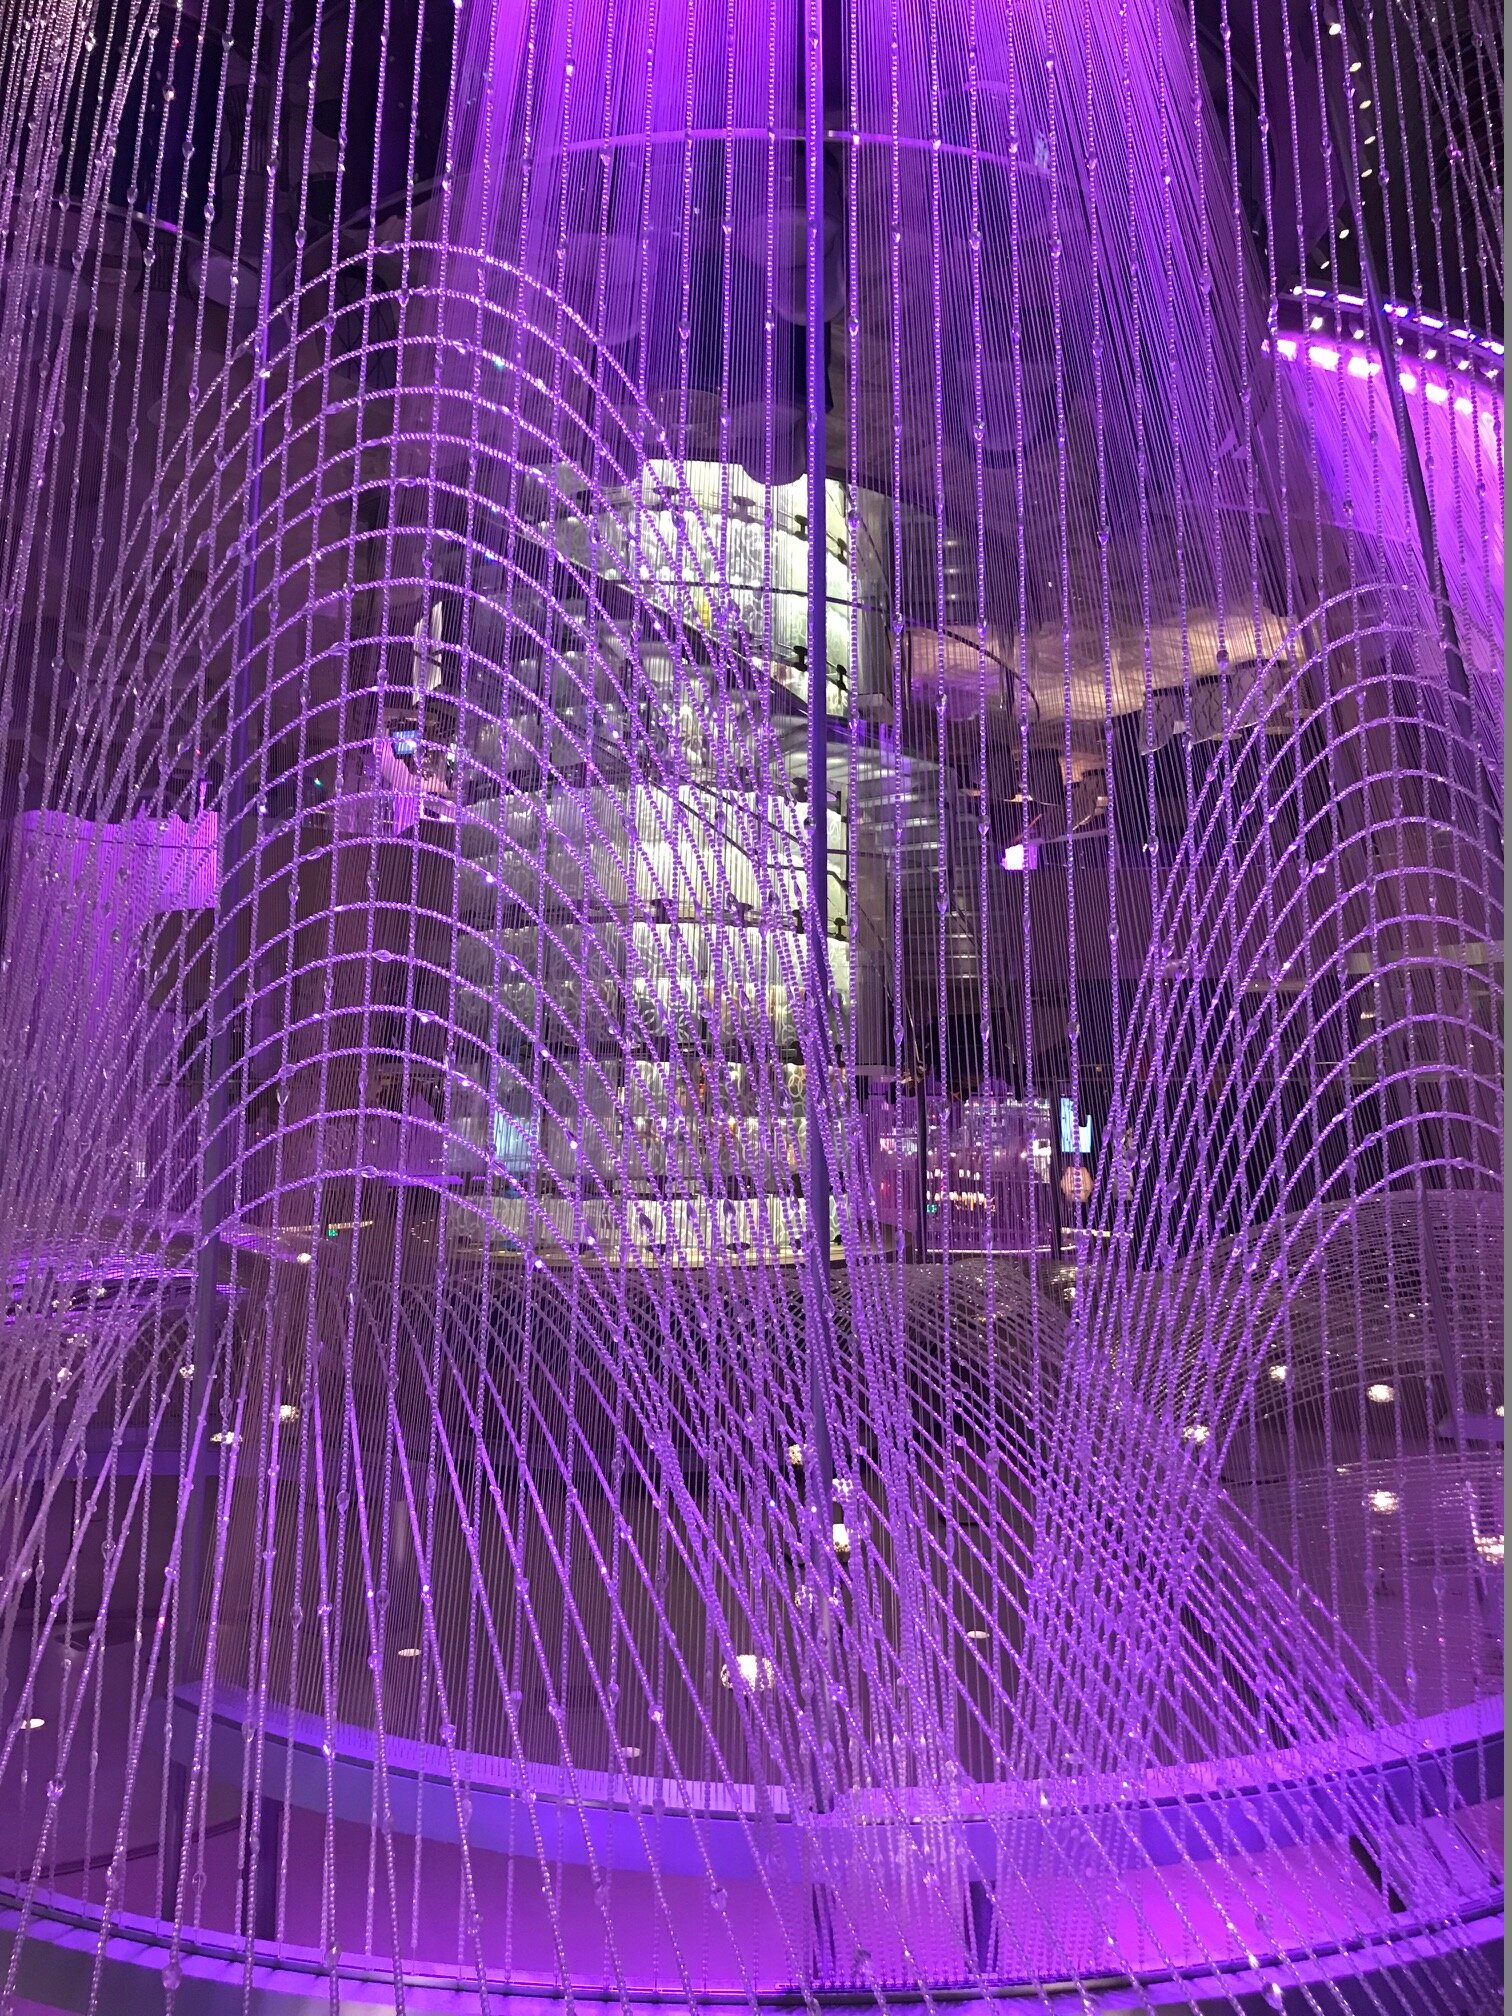 Las Vegas Travel Guide - Top things to do when in Las Vegas - The Chandelier at the Cosmopolitan